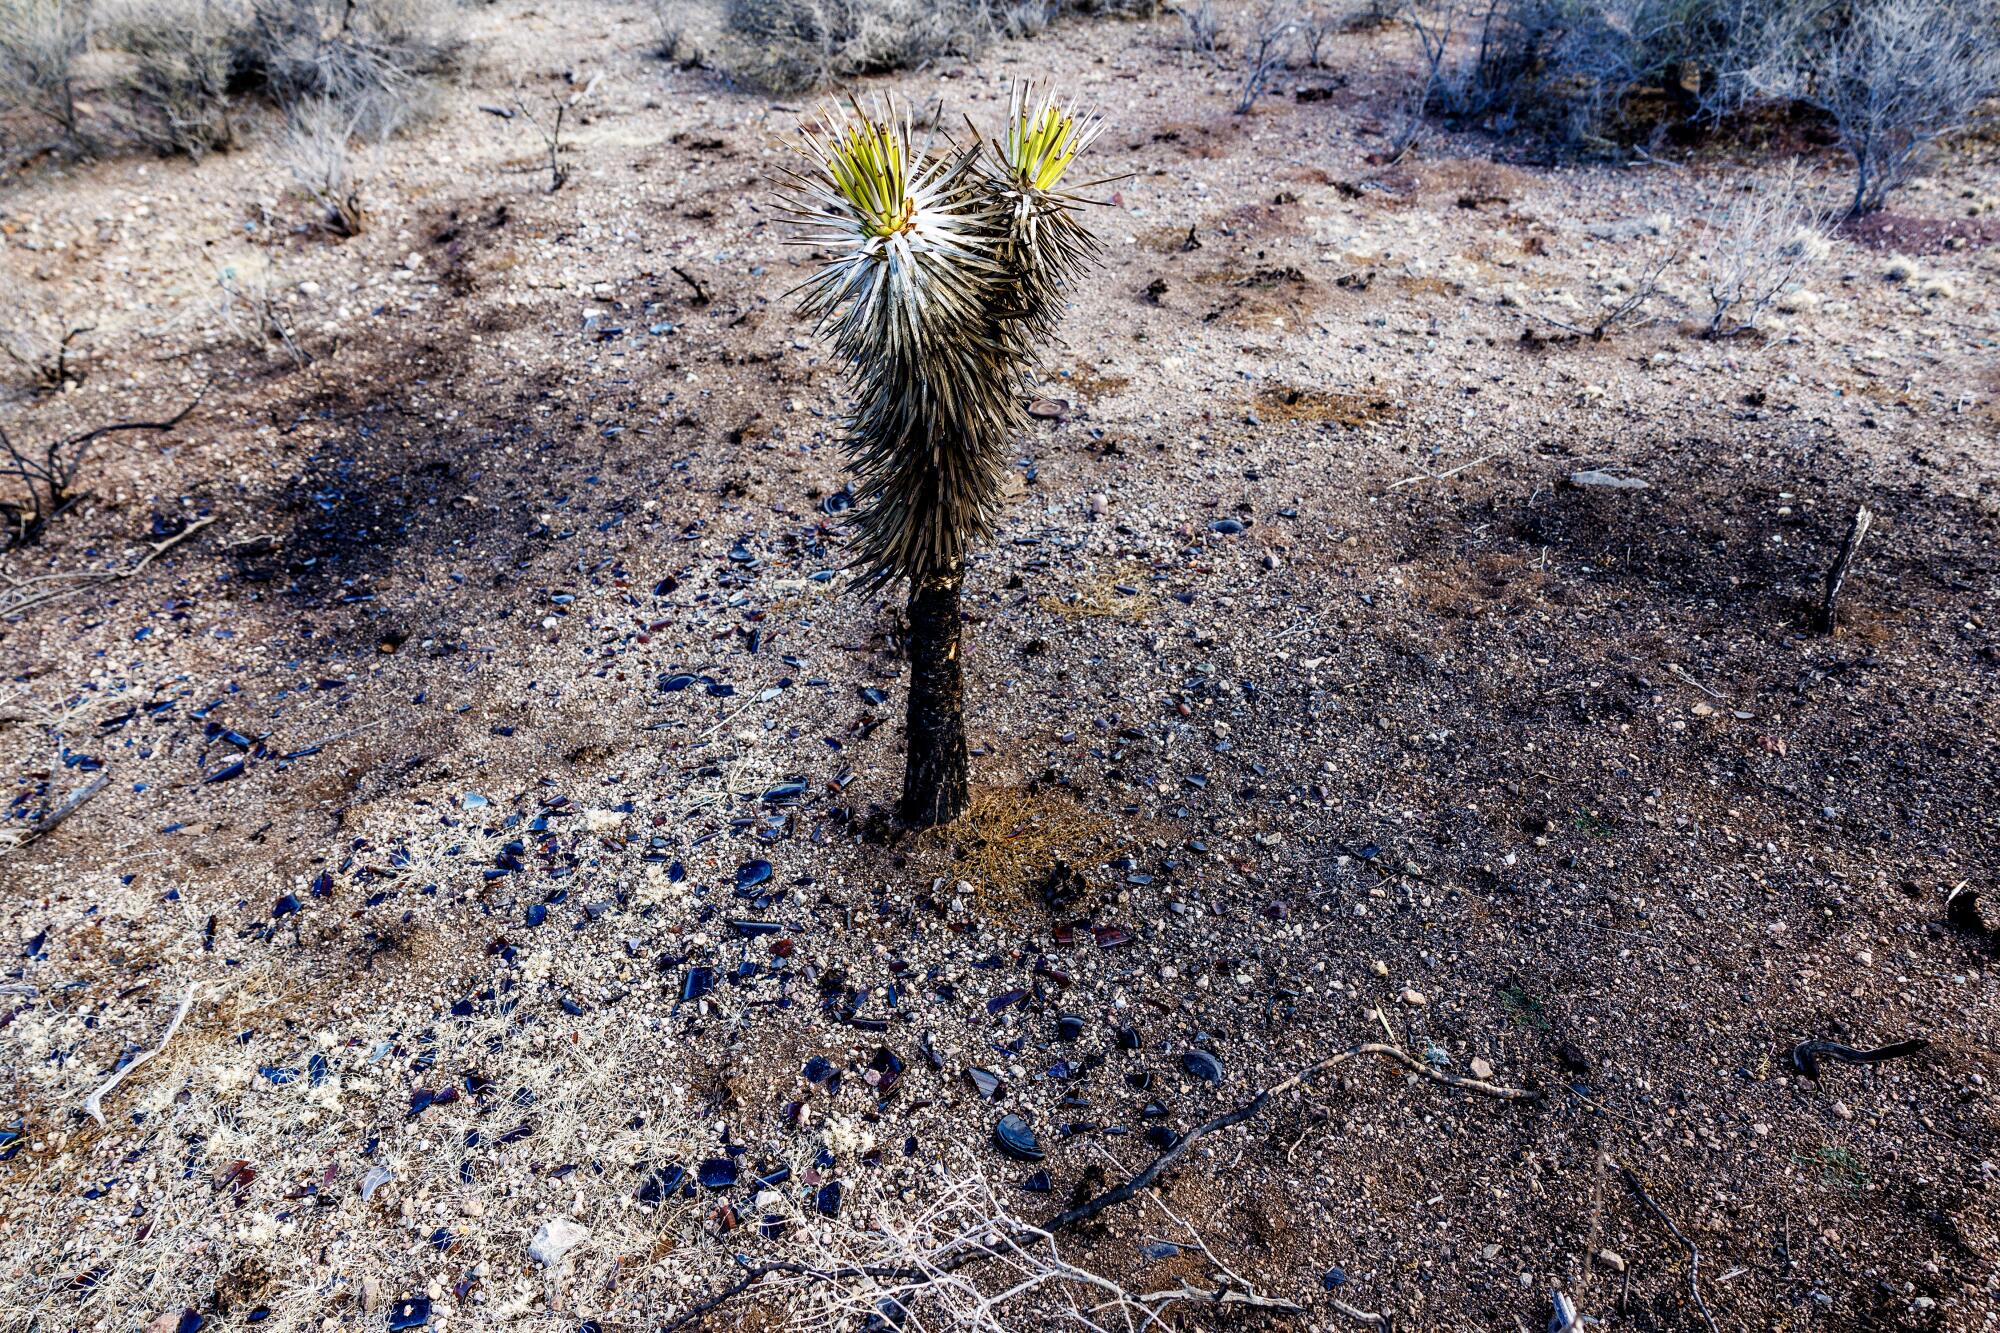 A yucca plant rises from a charred patch of desert.